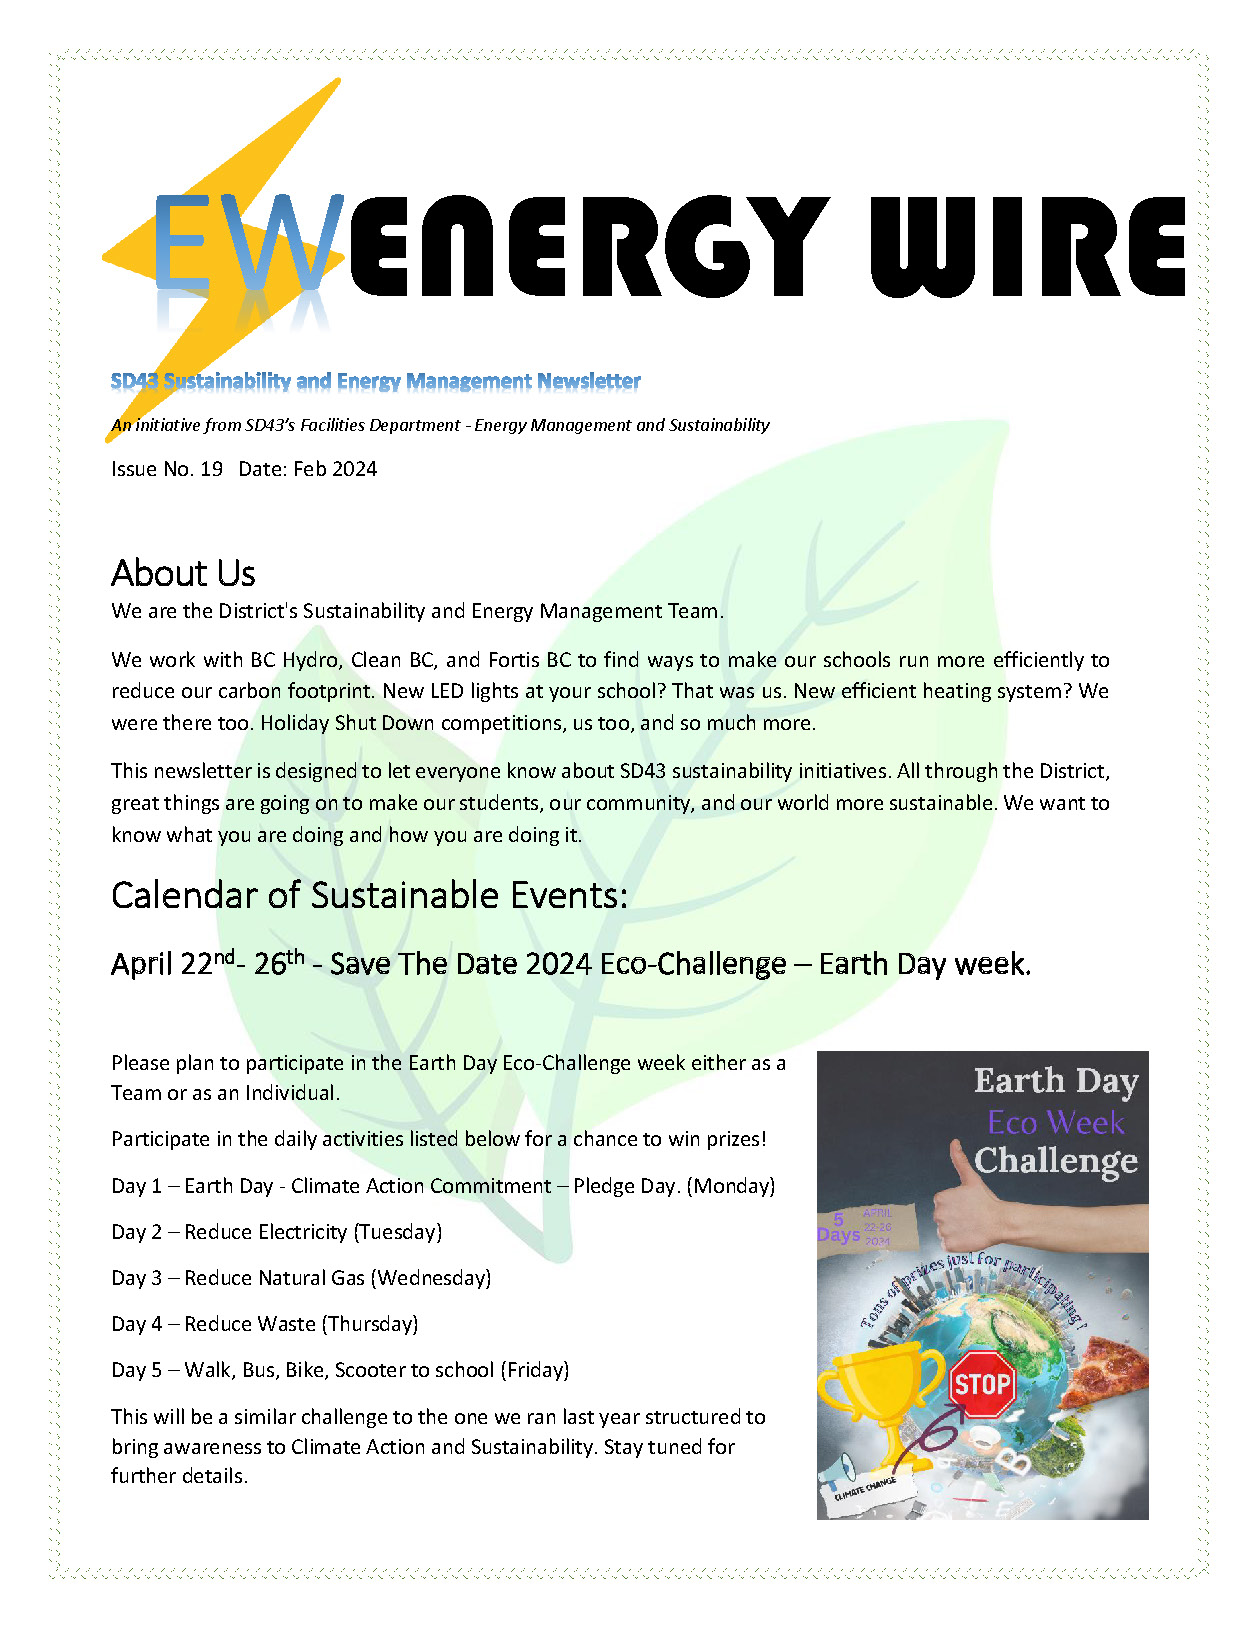 Feb 2024 - Energy Wire Newsletter_Page_01.jpg